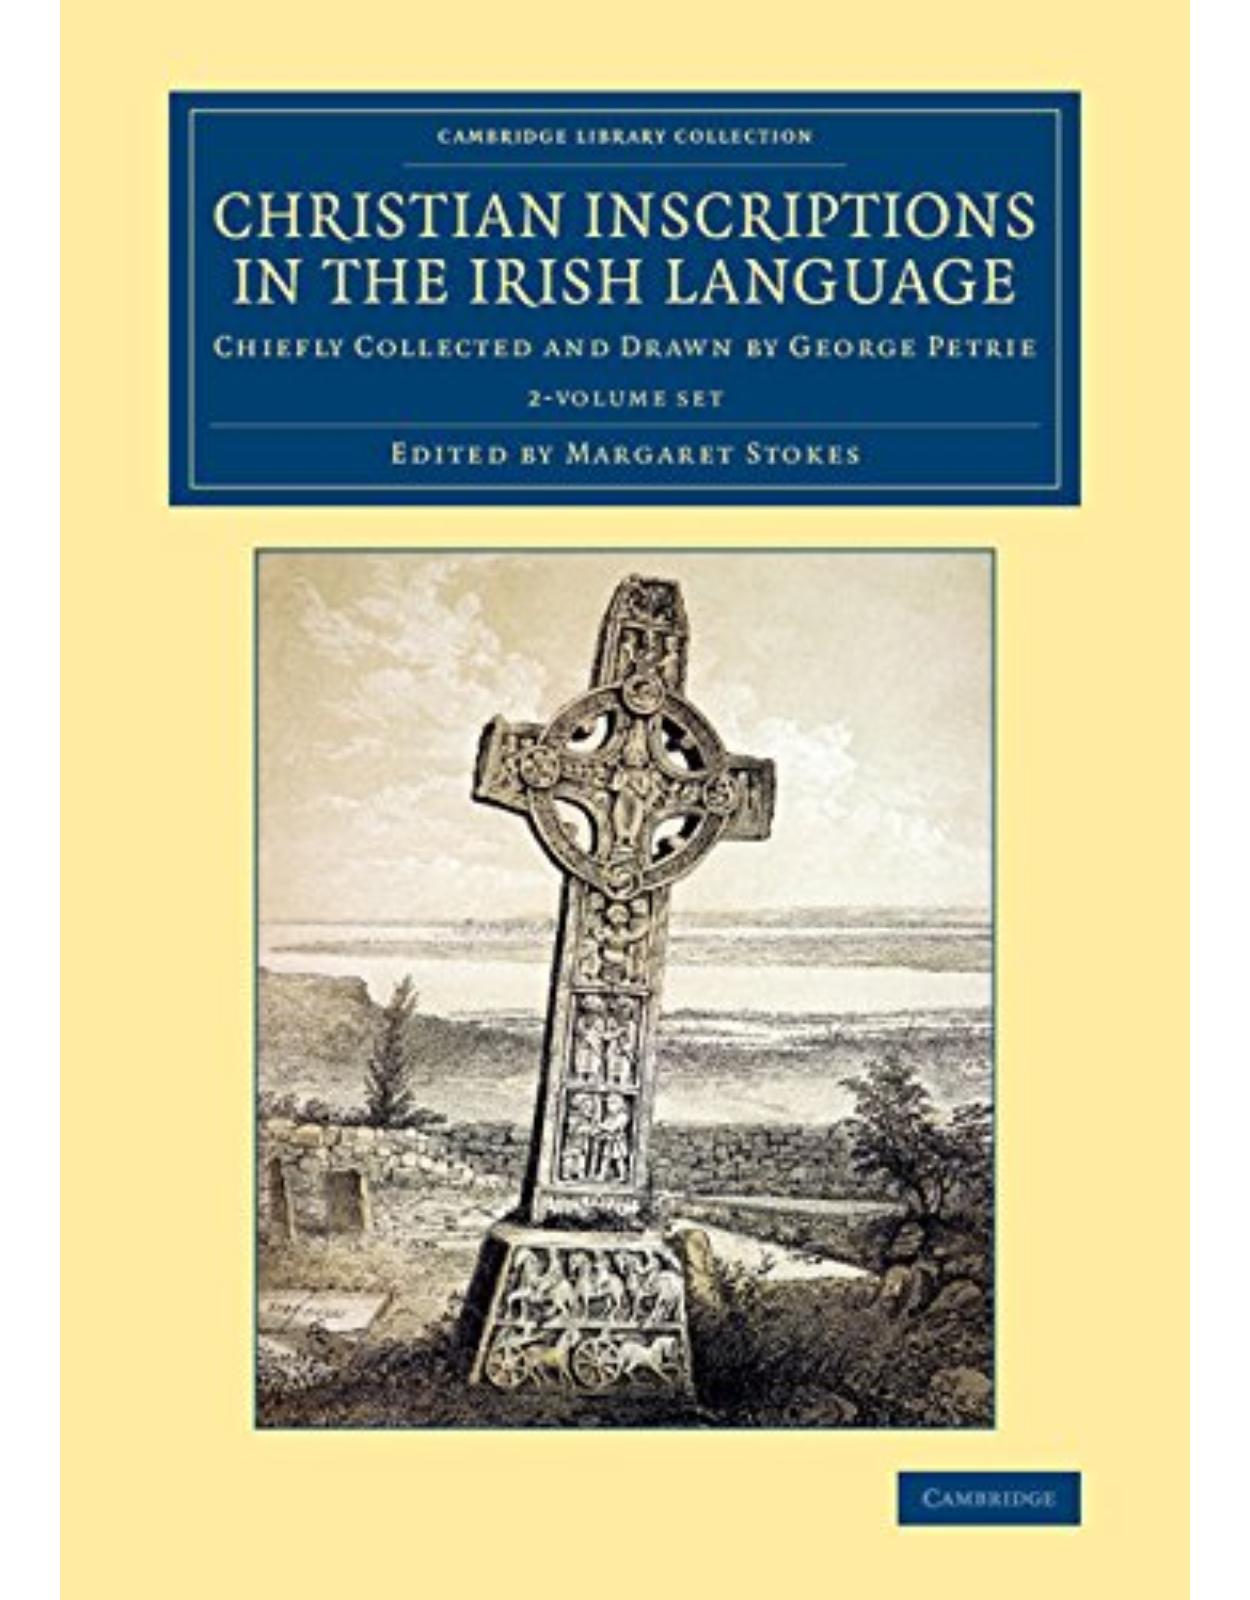 Christian Inscriptions in the Irish Language 2 Volume Set: Chiefly Collected and Drawn by George Petrie (Cambridge Library Collection - Archaeology)